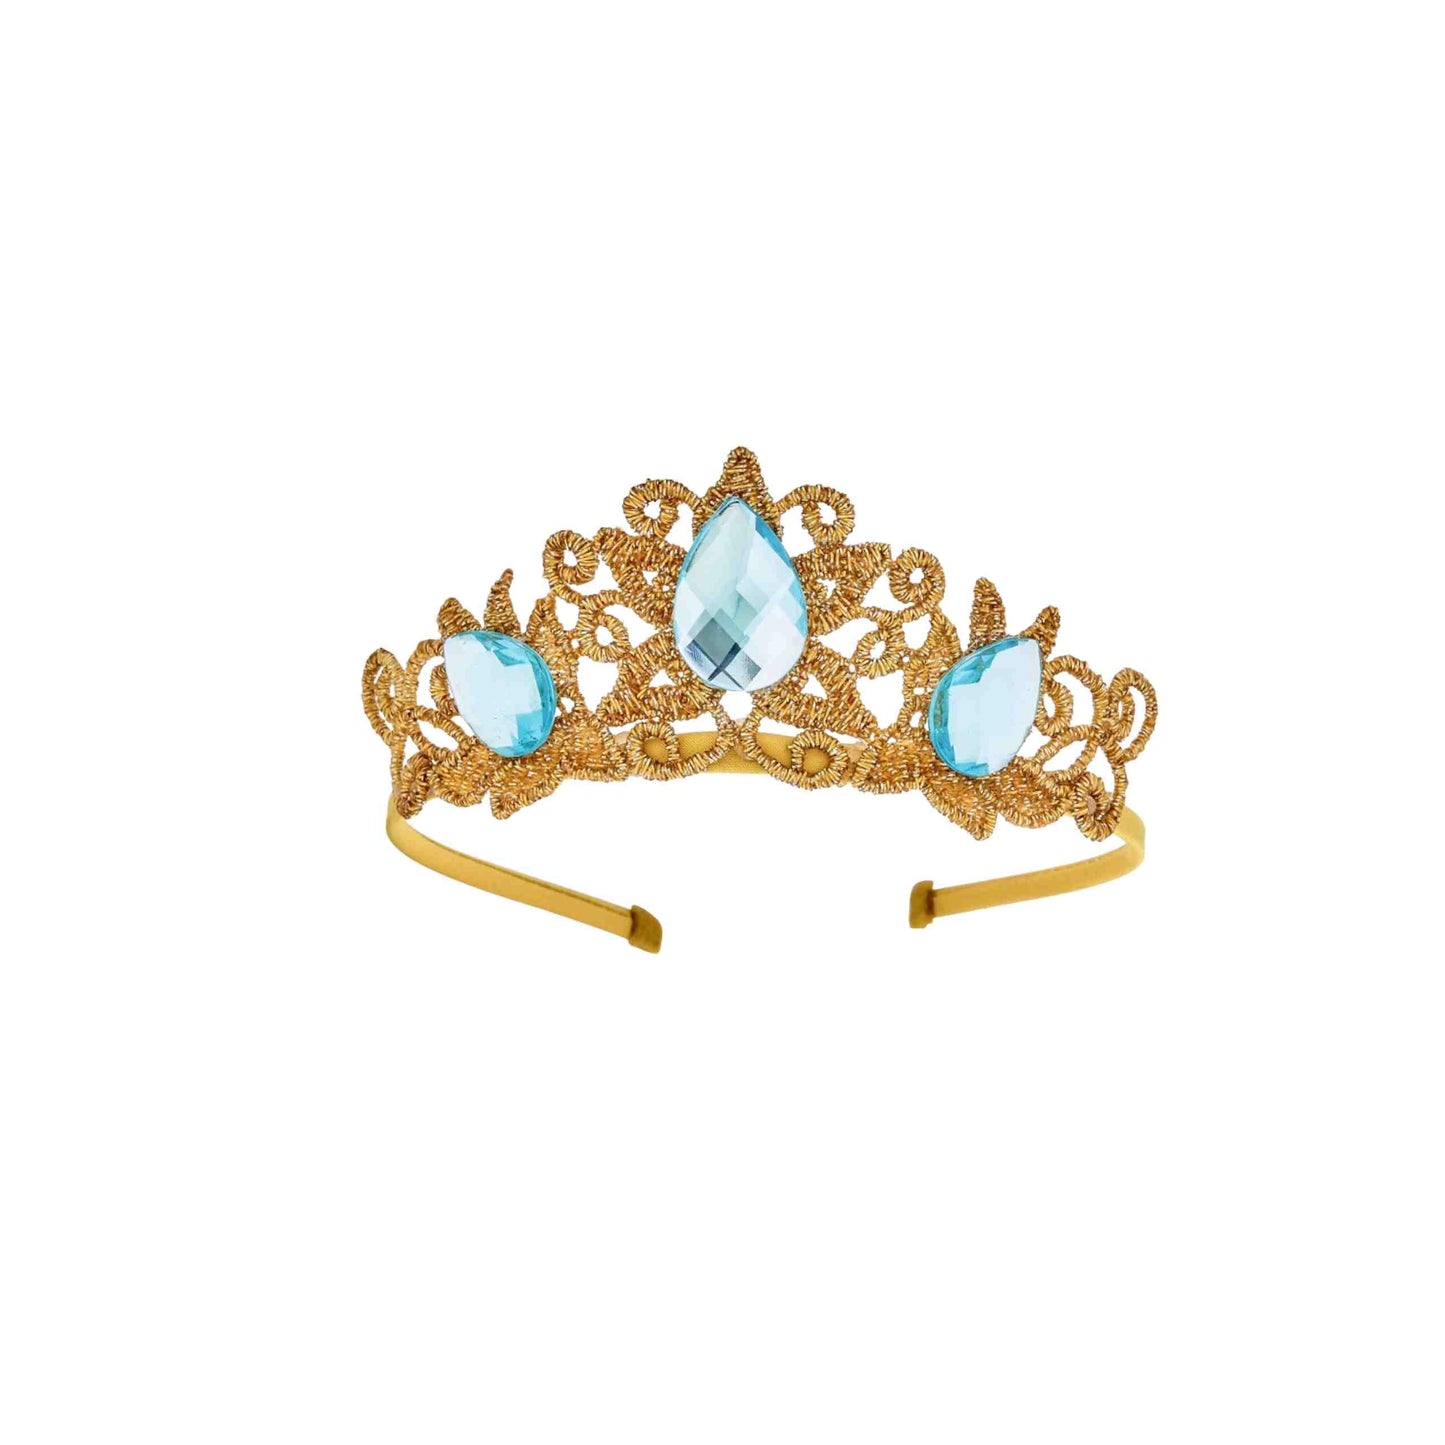 a gold tiara with blue stones on a white background